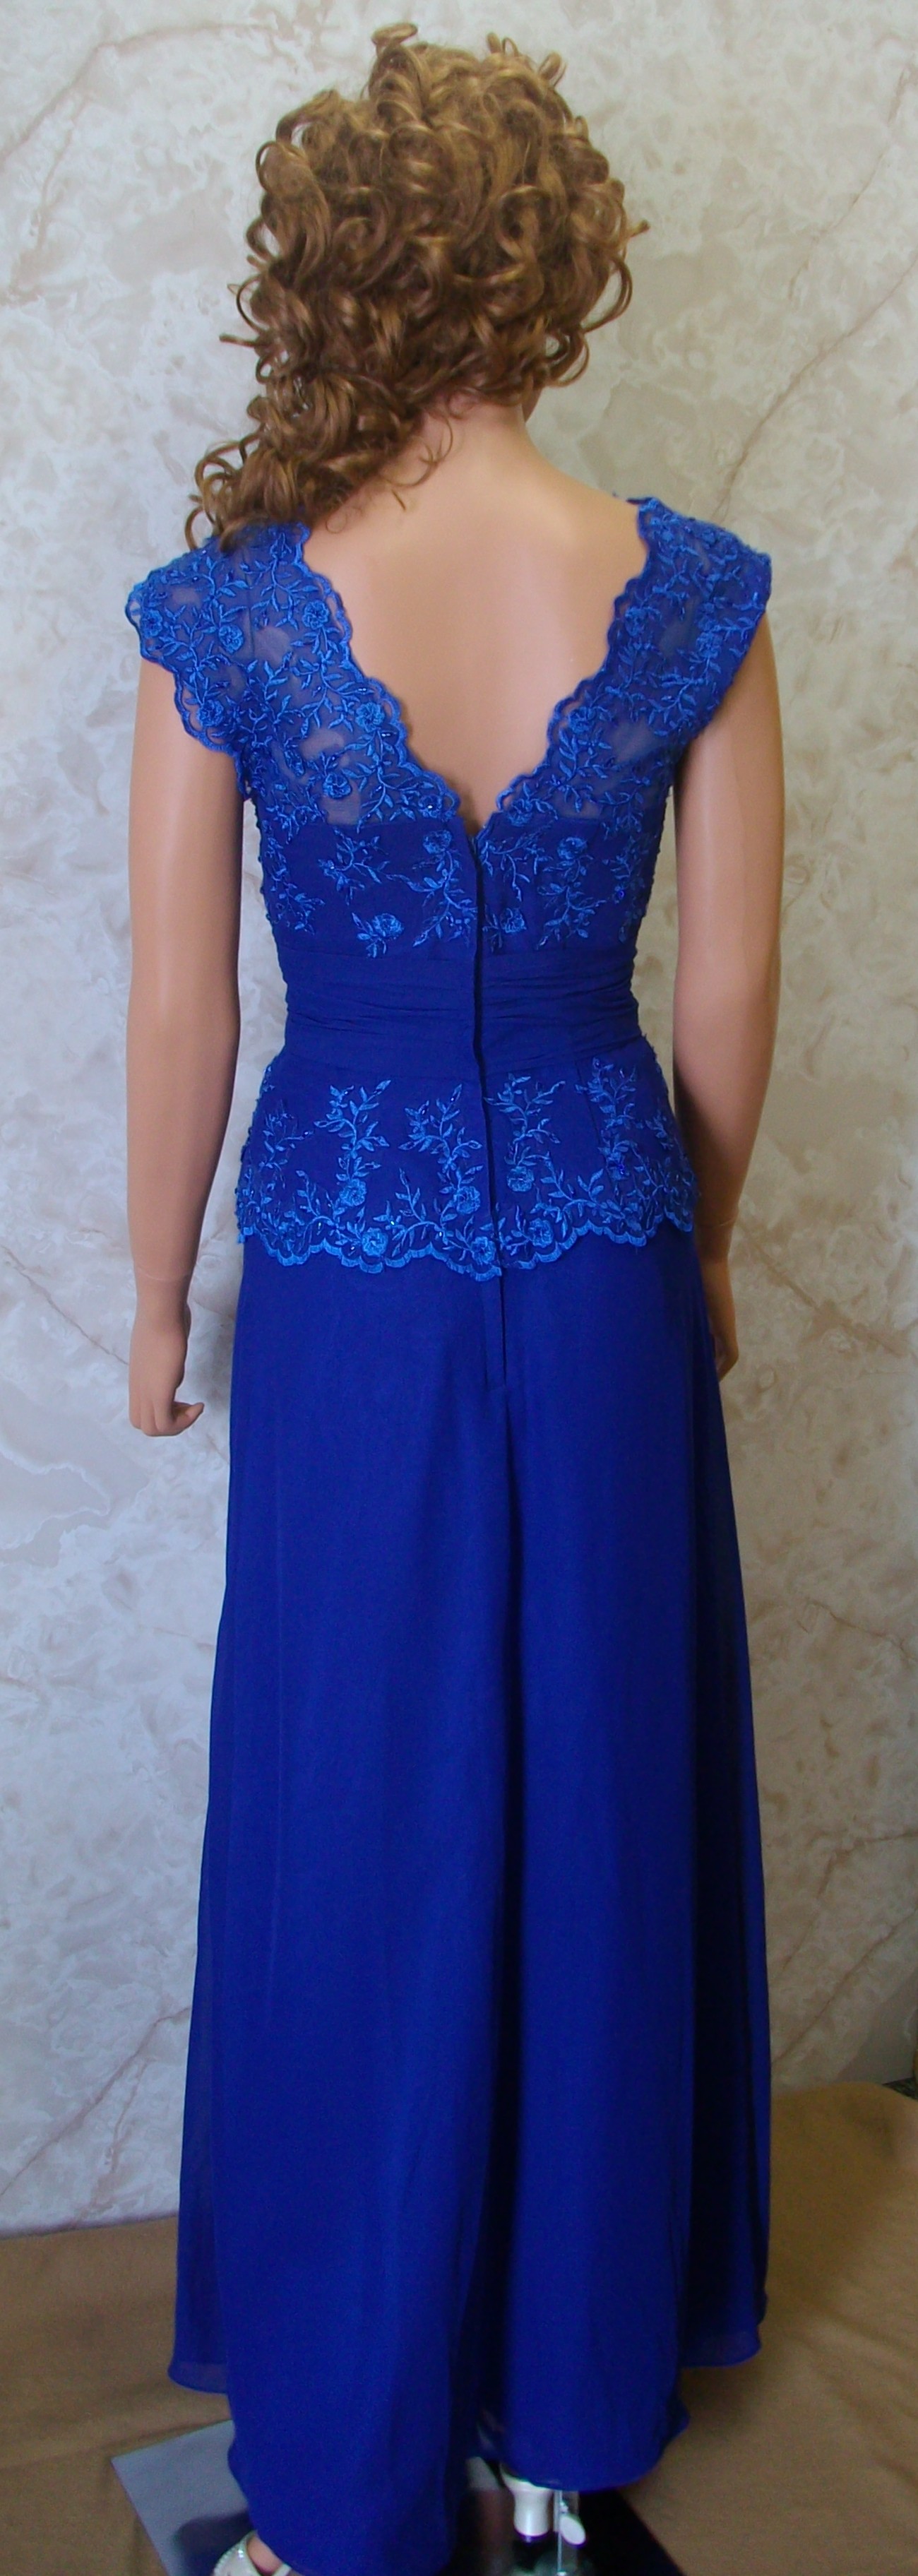 blue mother of the bride dress $110